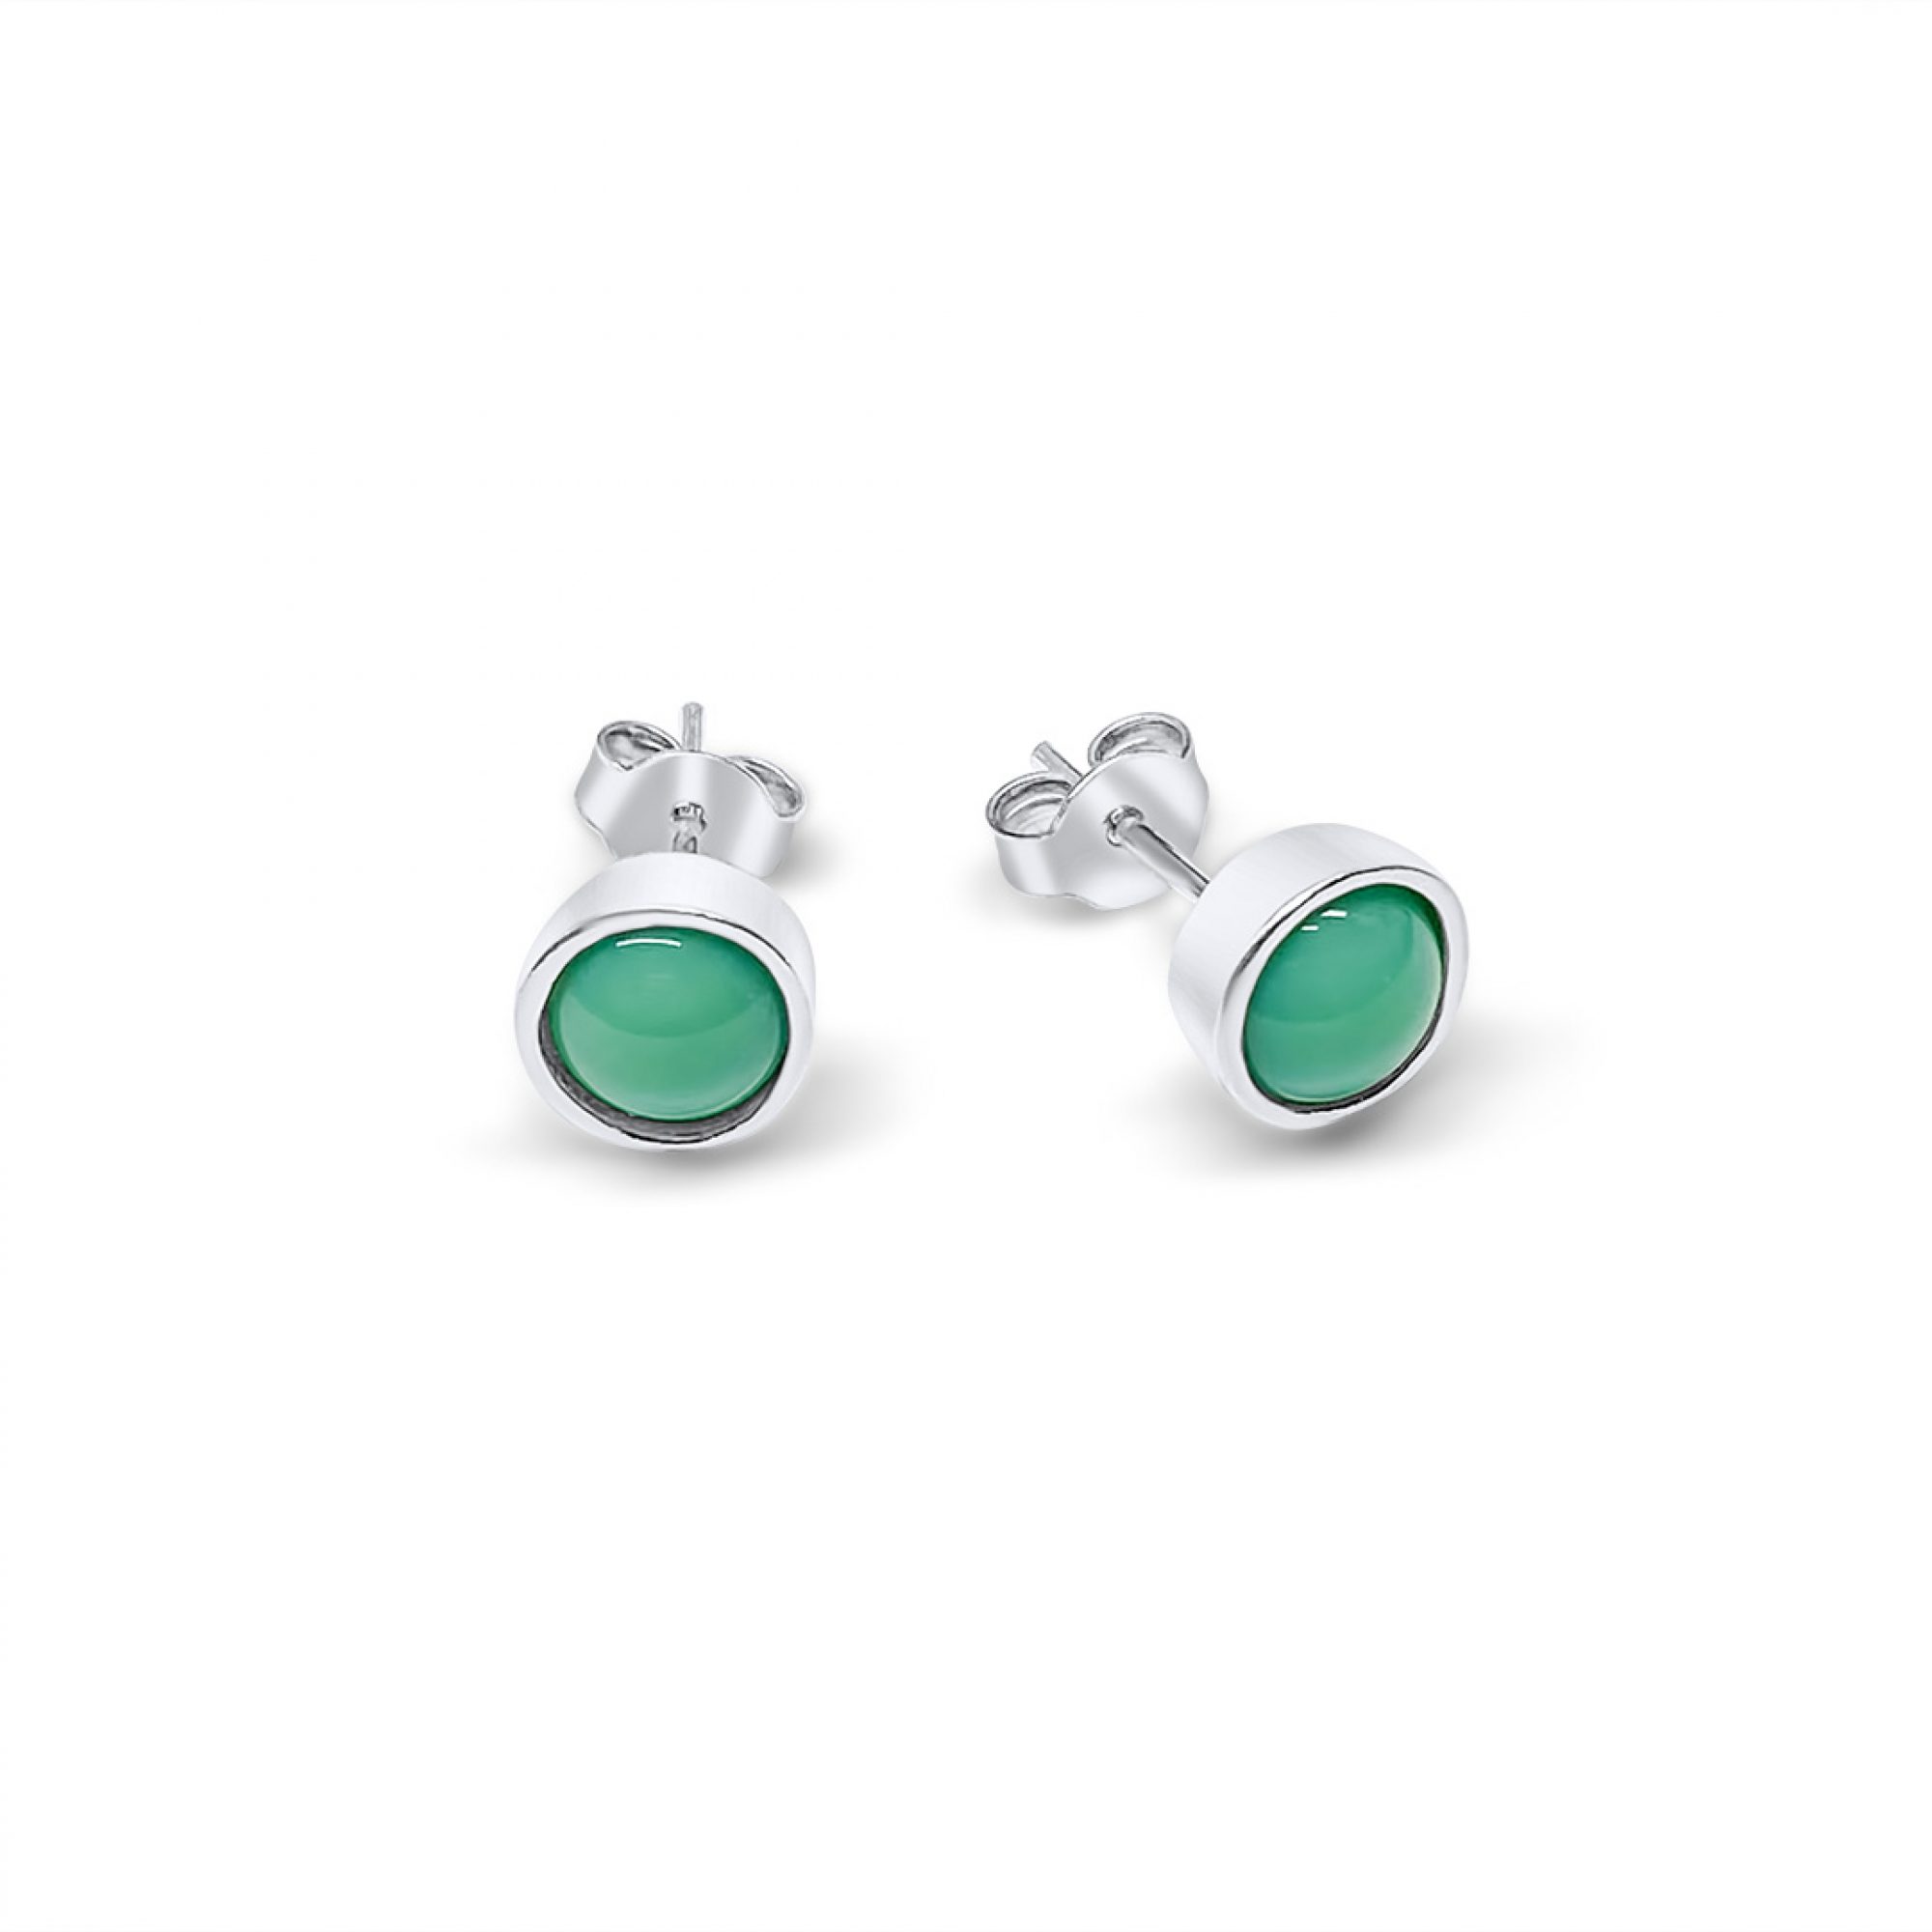 Silver stud earrings with turquoise stones